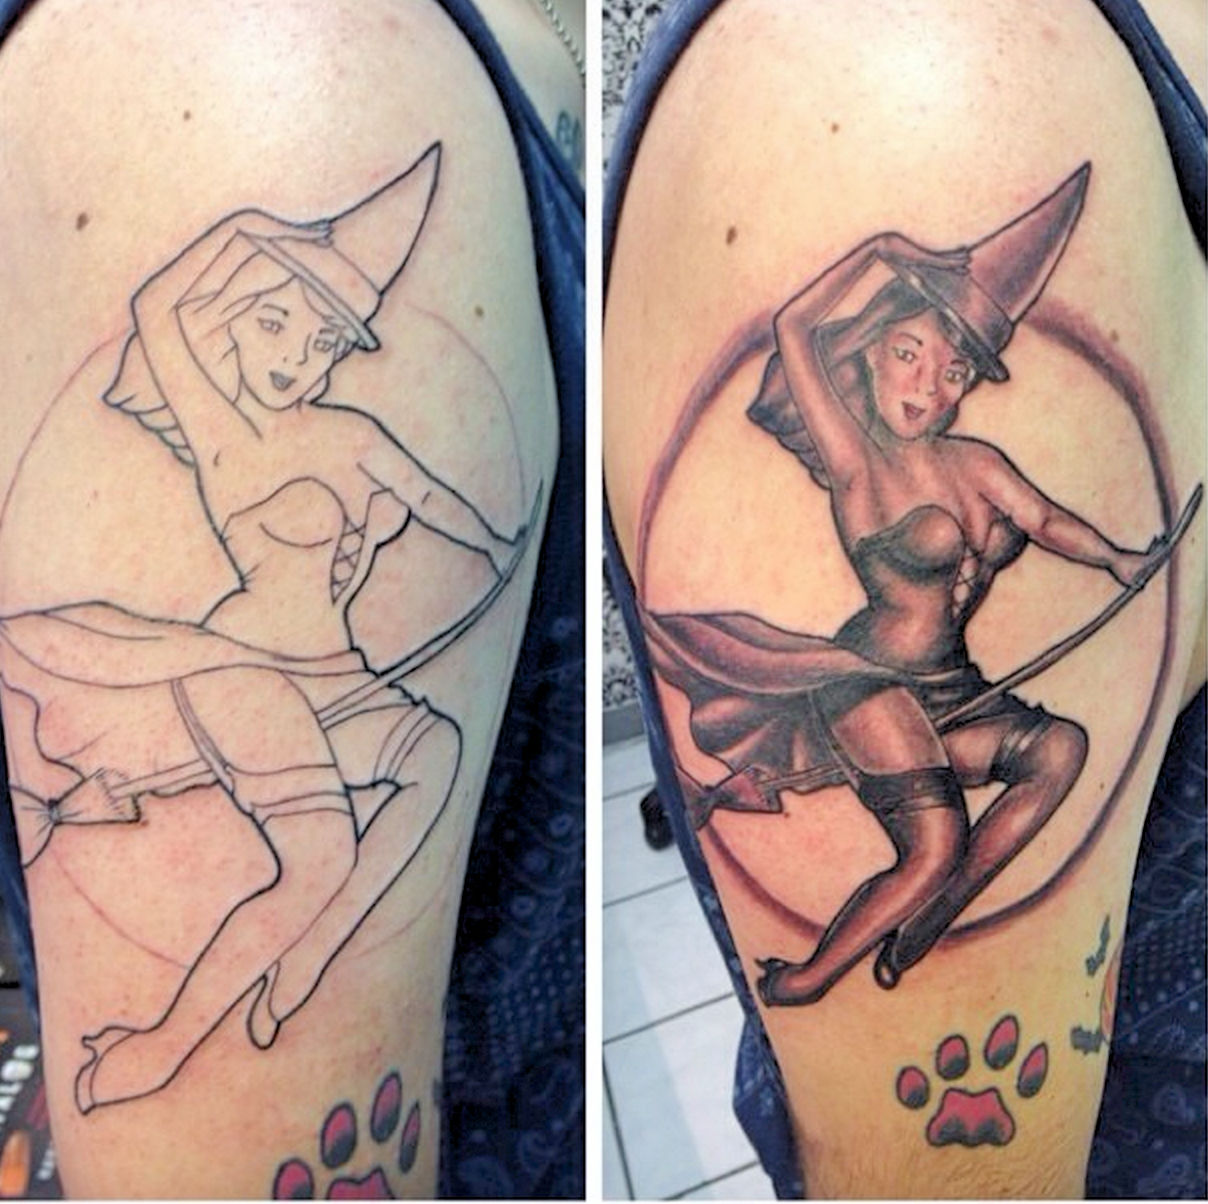 Pinupwitchtattoo_fotor. vintage-witch-pin-up-pinup-witch-witch-pinup-...